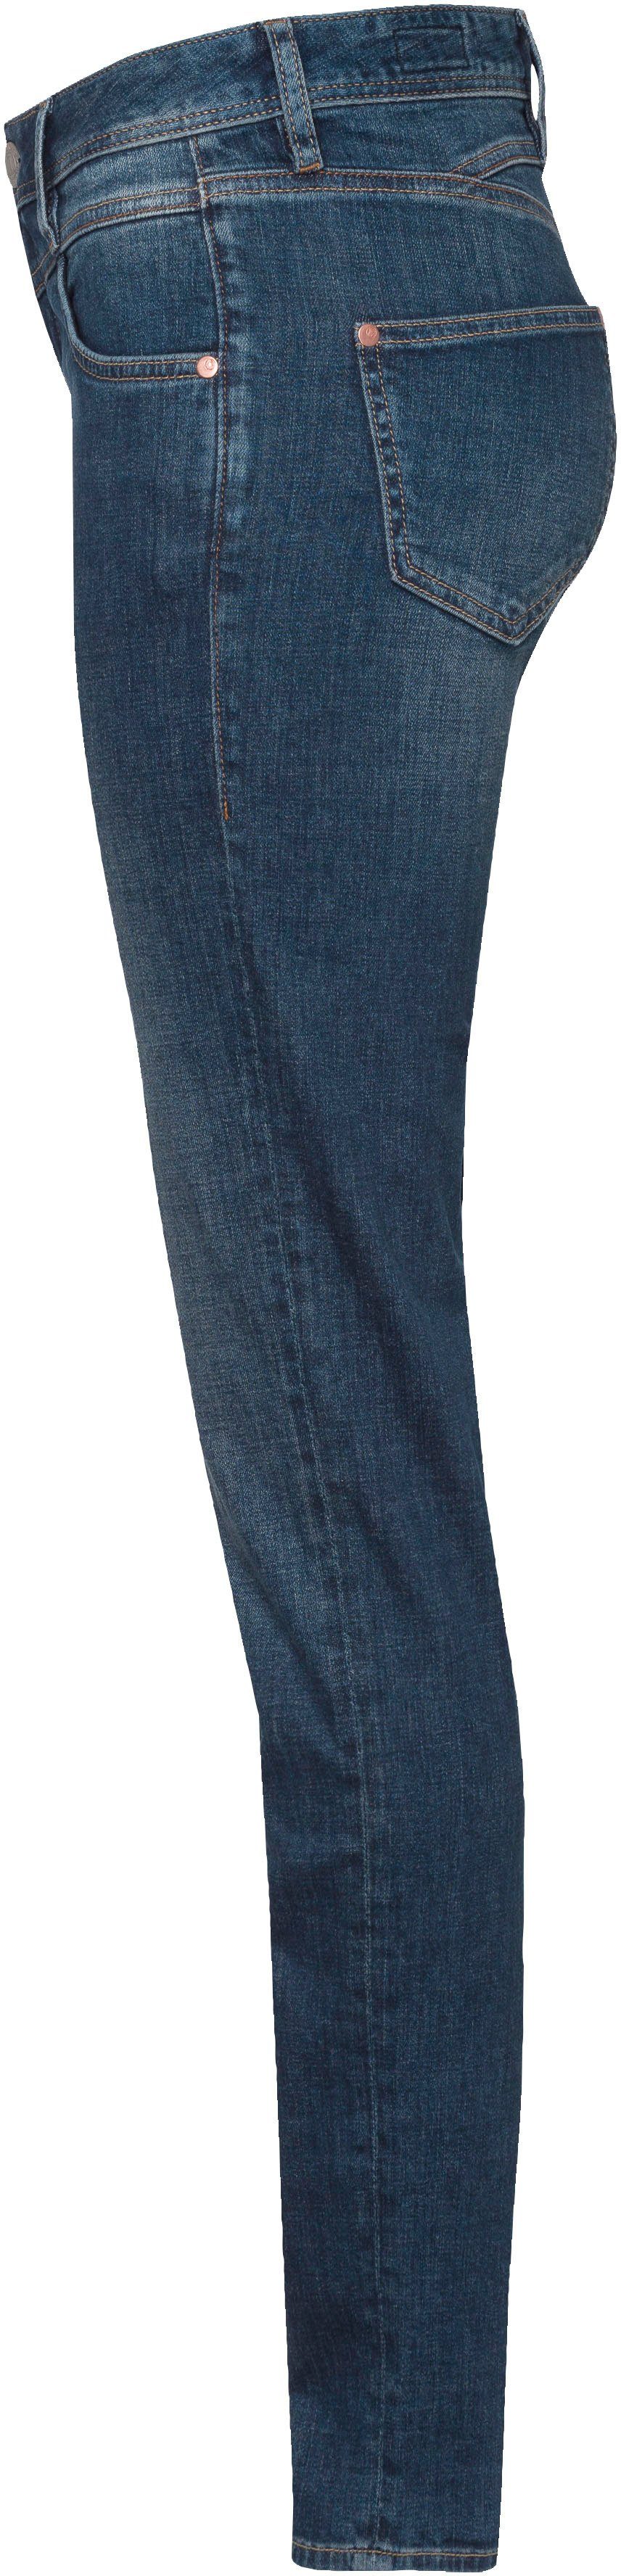 Normal Polyester Slim-fit-Jeans RECYCLED Recycled Herrlicher used Waist SLIM PEPPY 034 DENIM